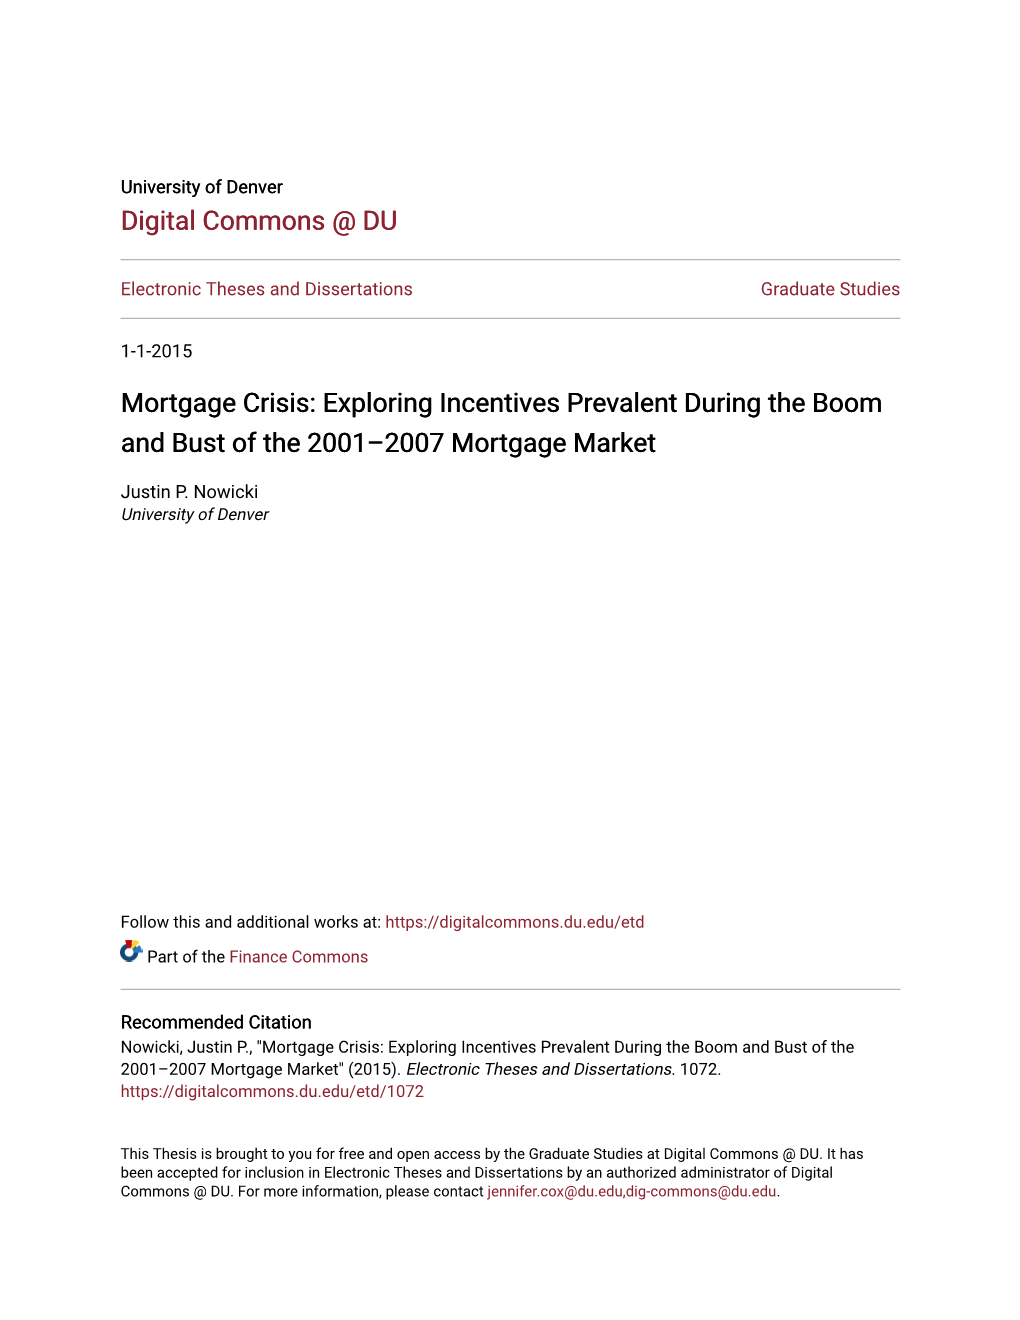 Mortgage Crisis: Exploring Incentives Prevalent During the Boom and Bust of the 2001–2007 Mortgage Market